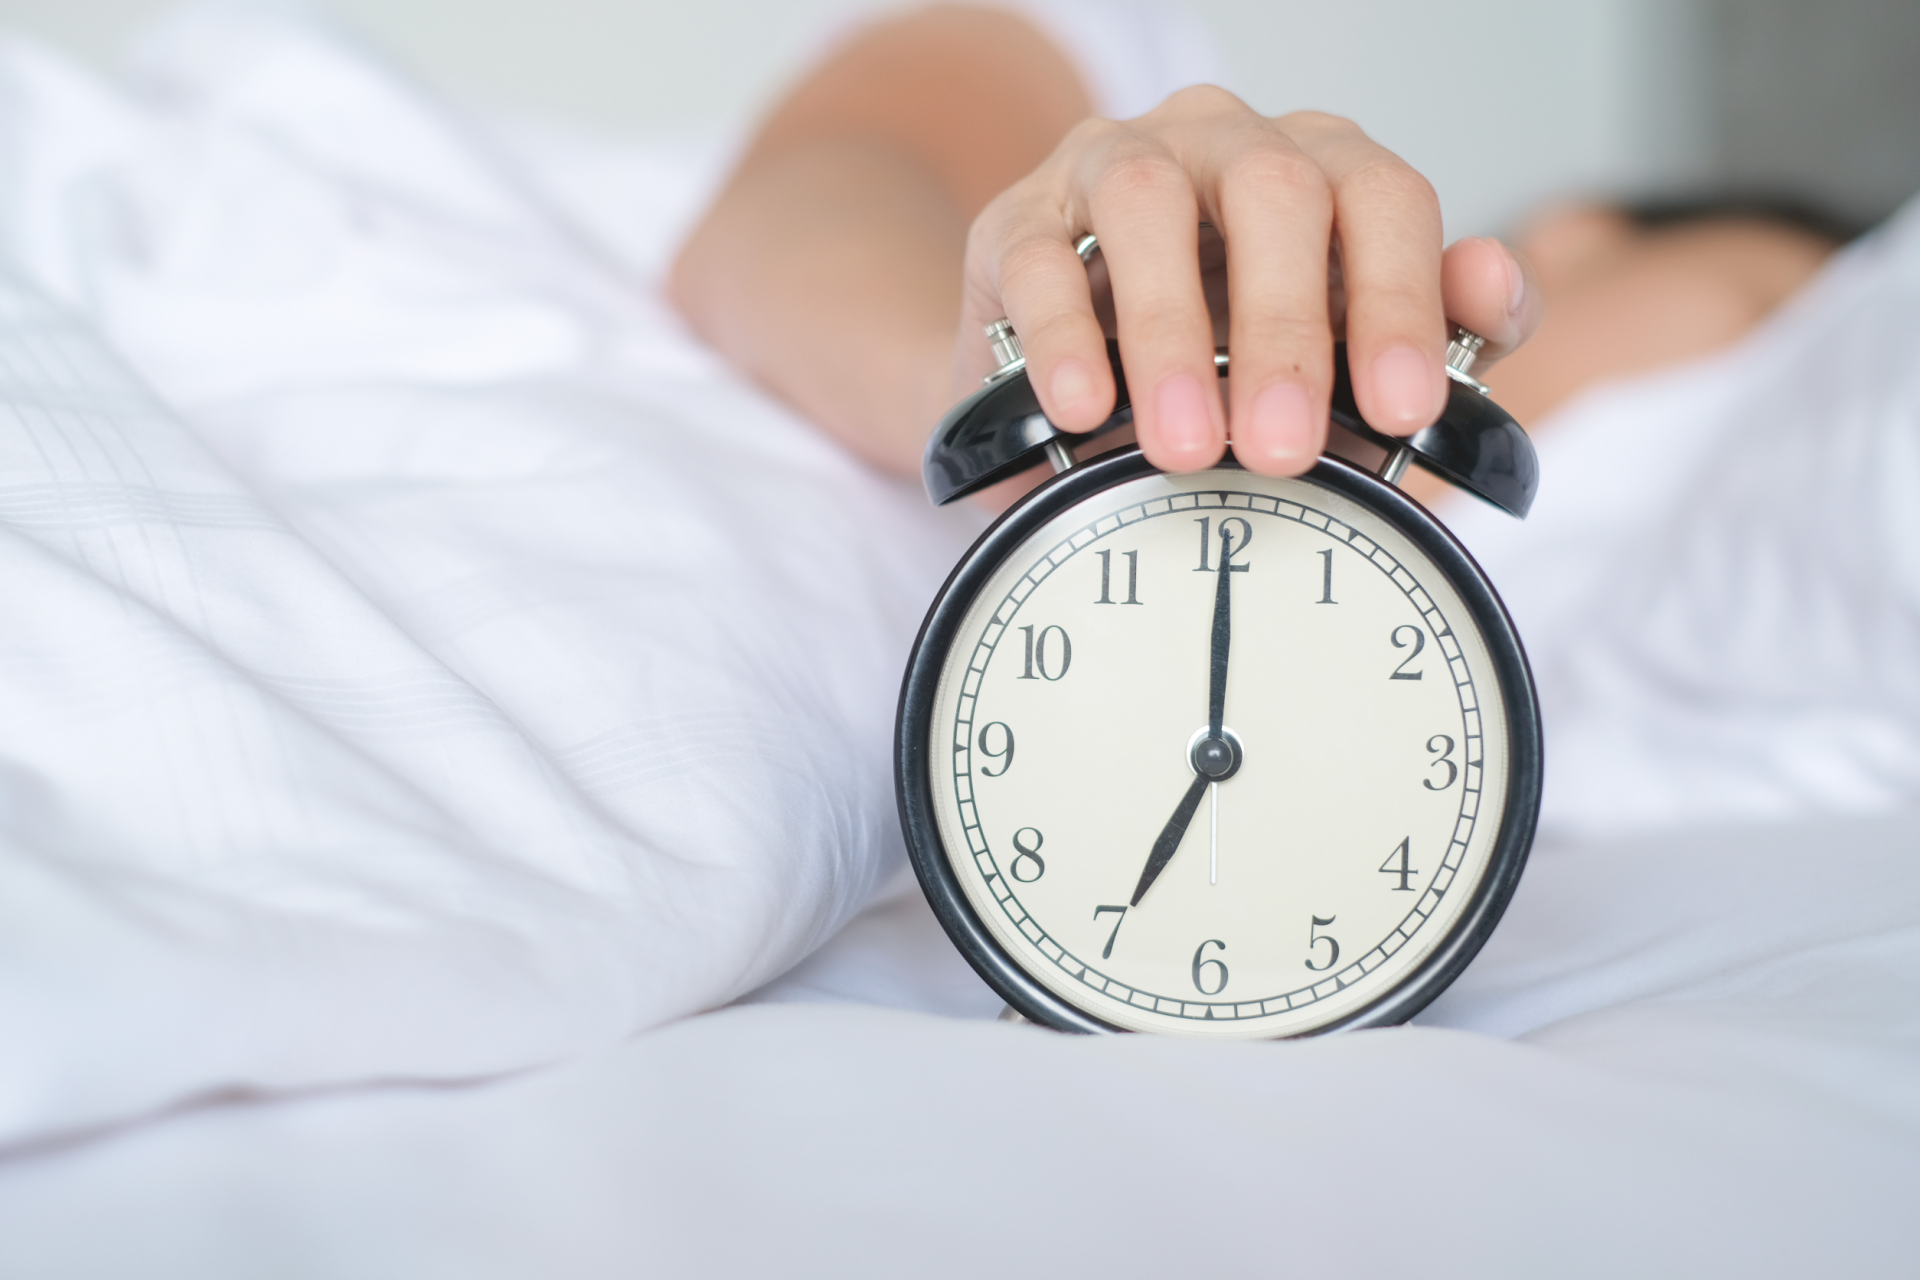 You Hit The “Snooze” Button On Receiving Enrollment Emails